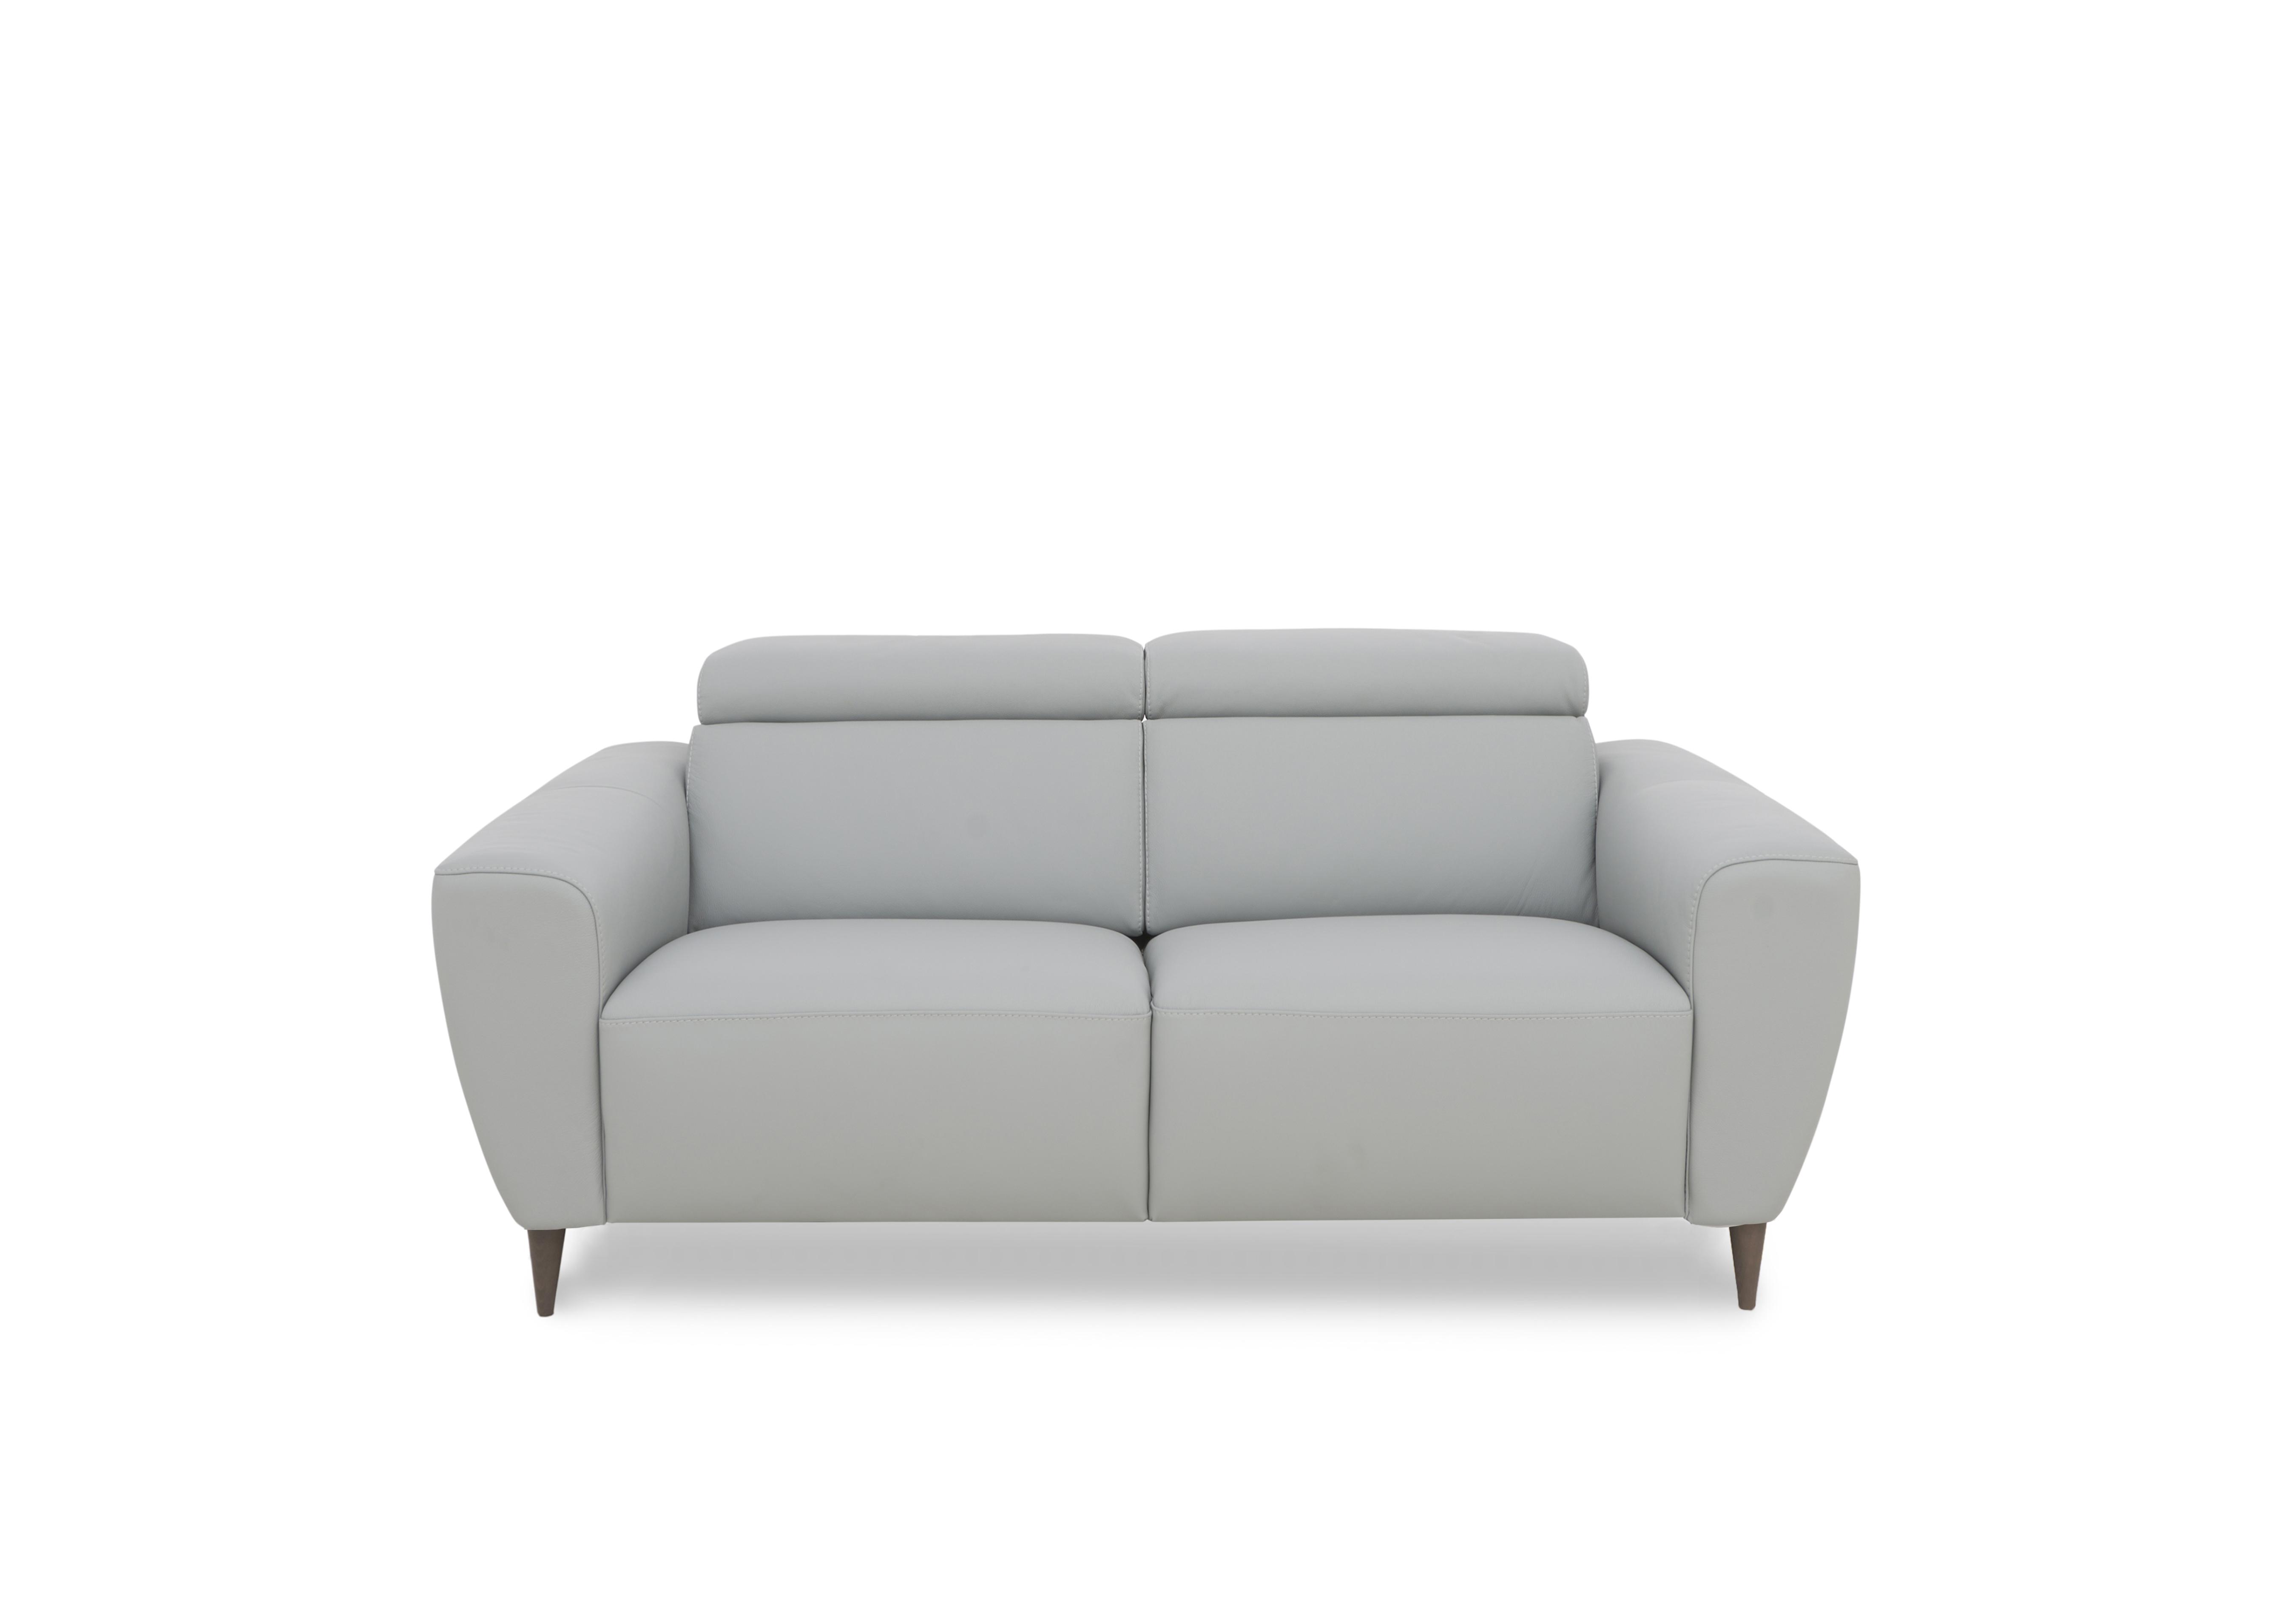 Milano 2 Seater Leather Sofa in 360 Torello Grig Allum To Ft on Furniture Village